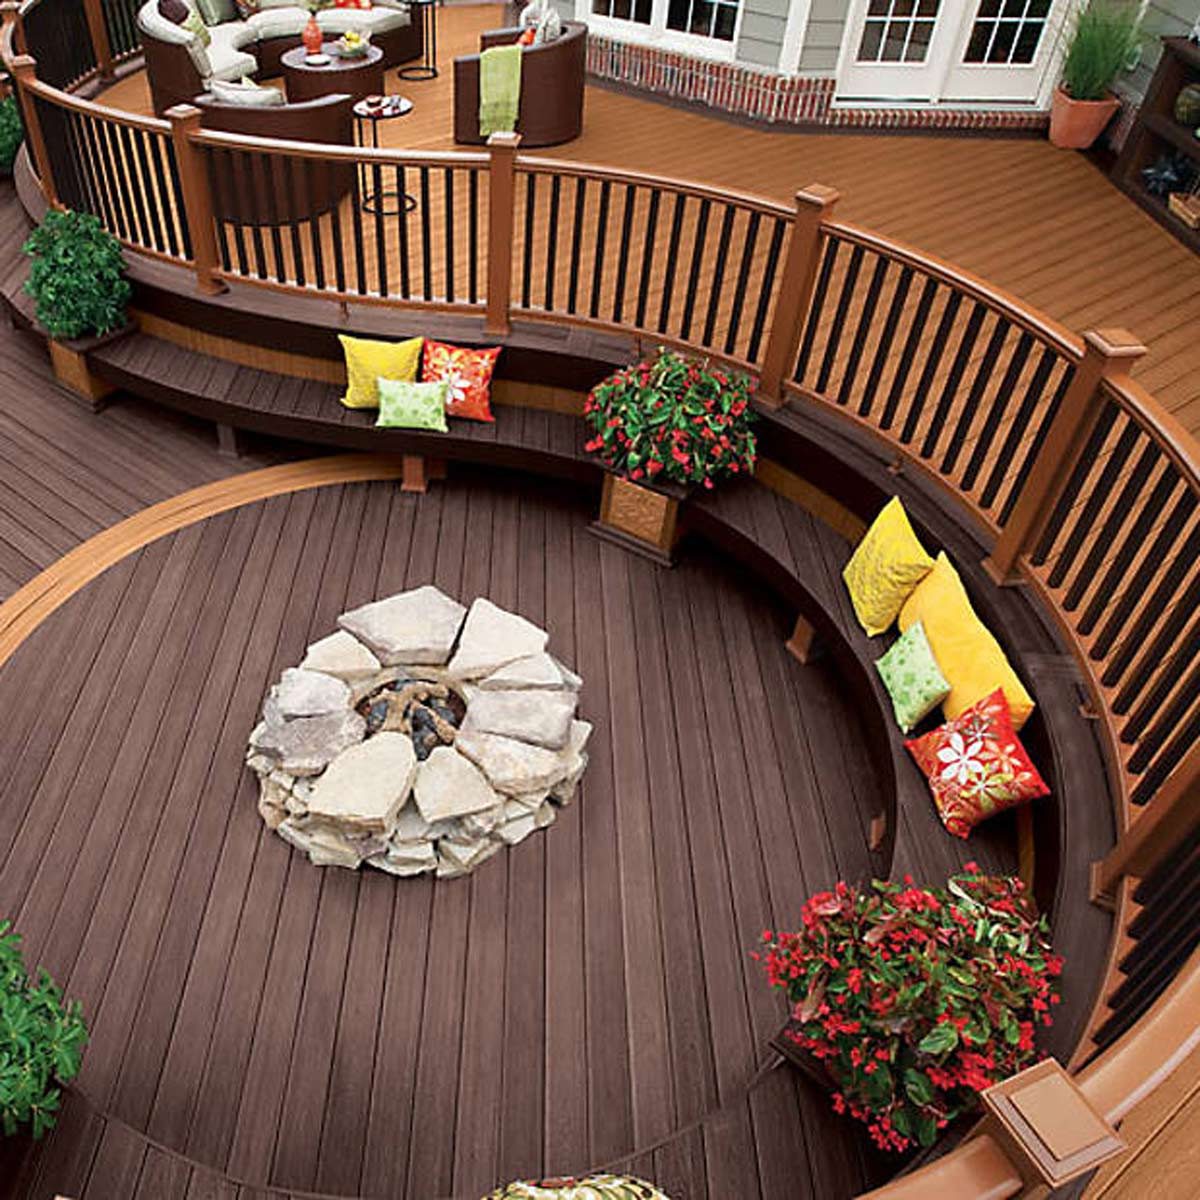 Trex Decking: Here's What You Need to Know